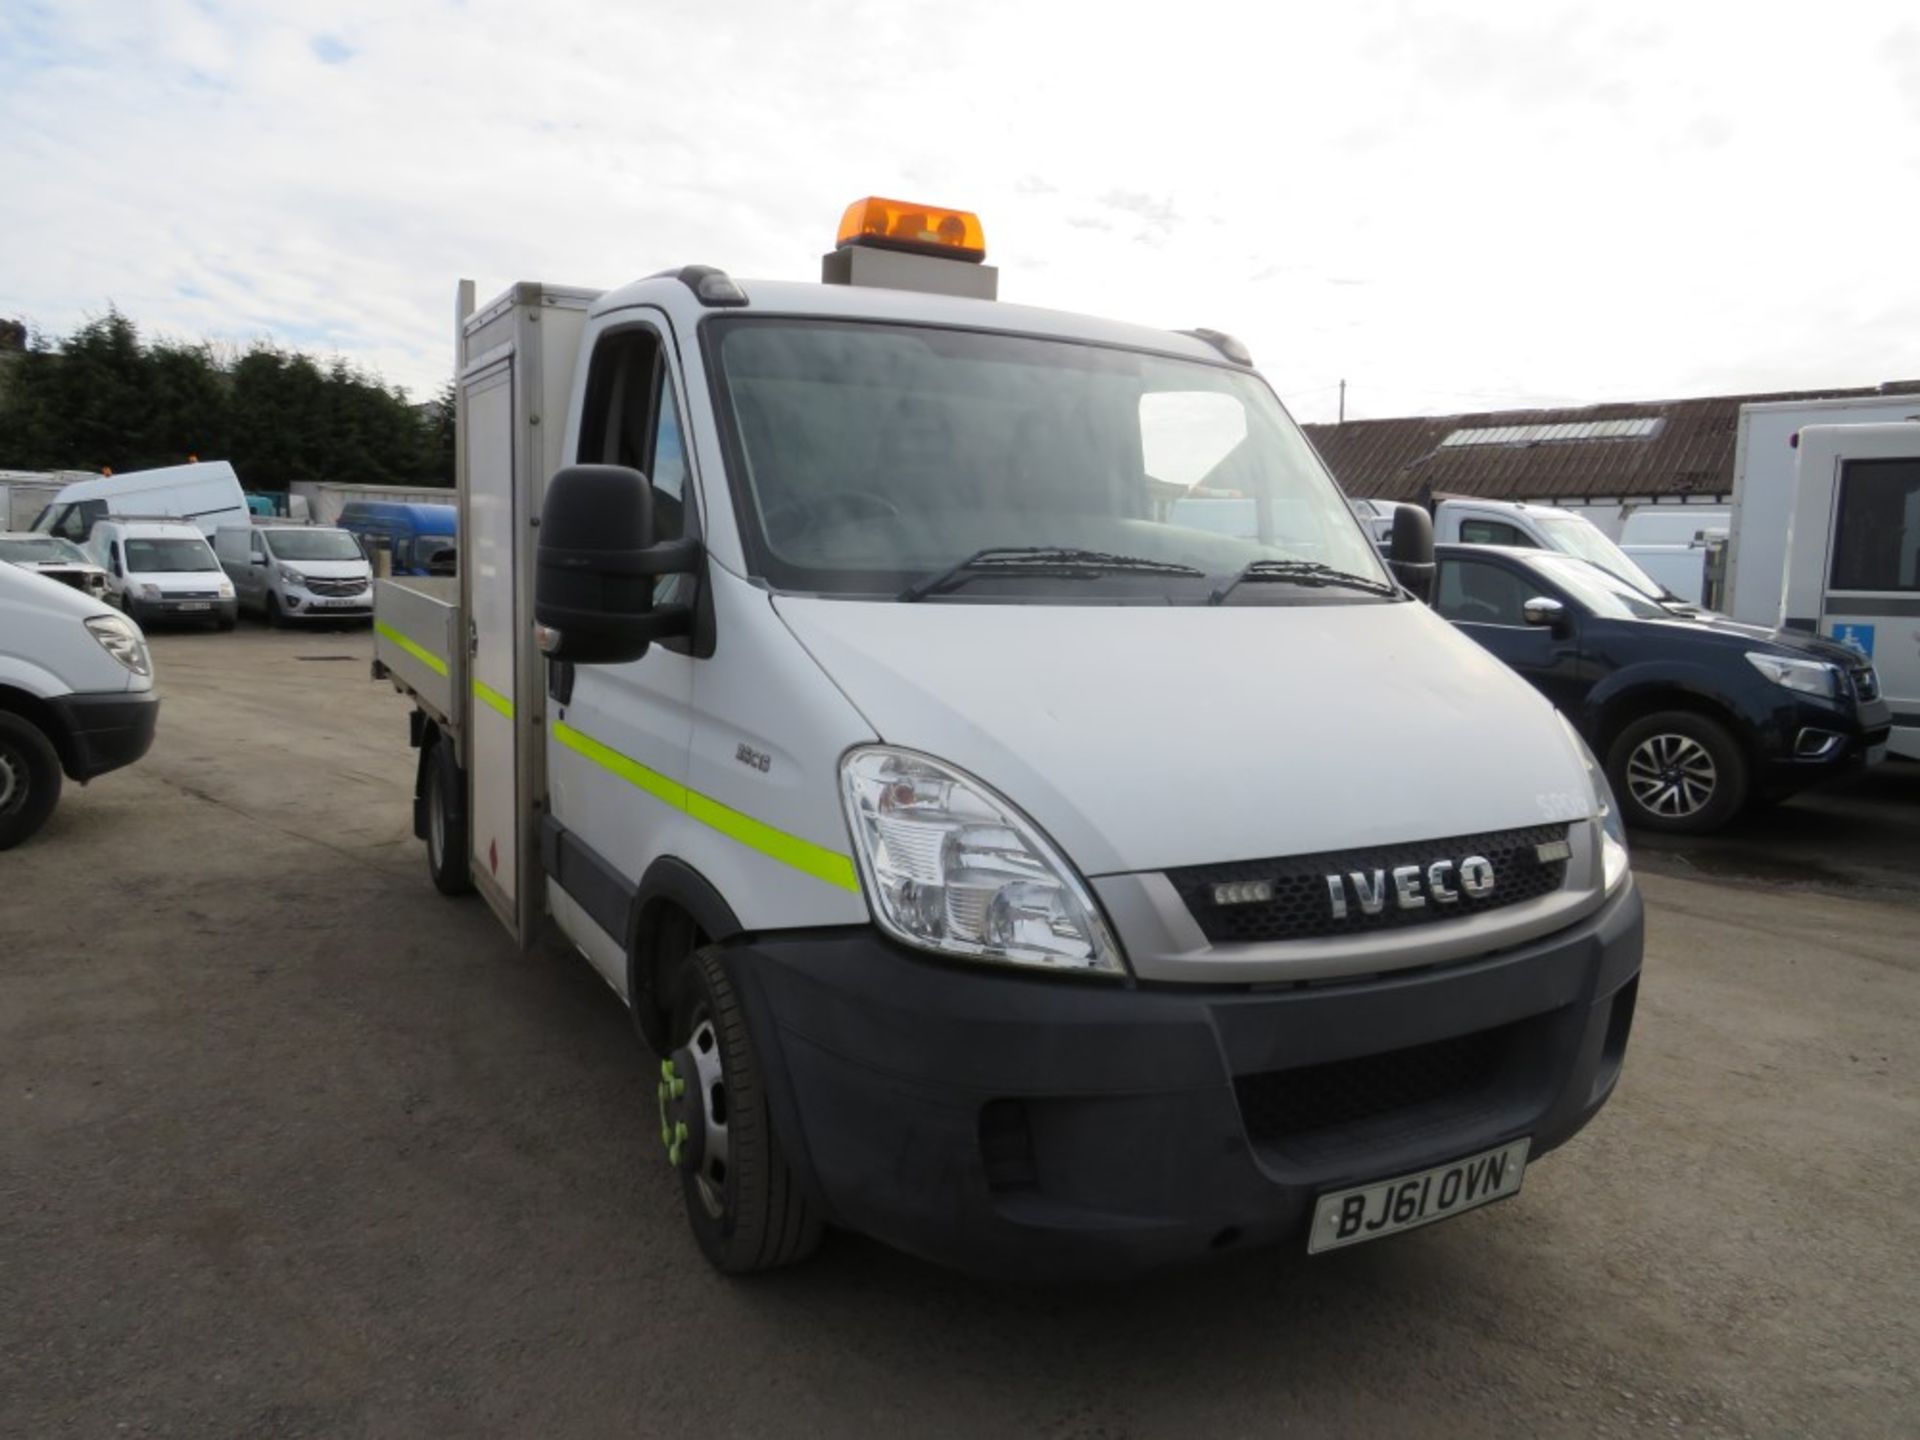 61 reg IVECO DAILY 35C15 MWB TIPPER (DIRECT COUNCIL) 1ST REG 10/11, TEST 09/20, 39253M, V5 HERE, 1